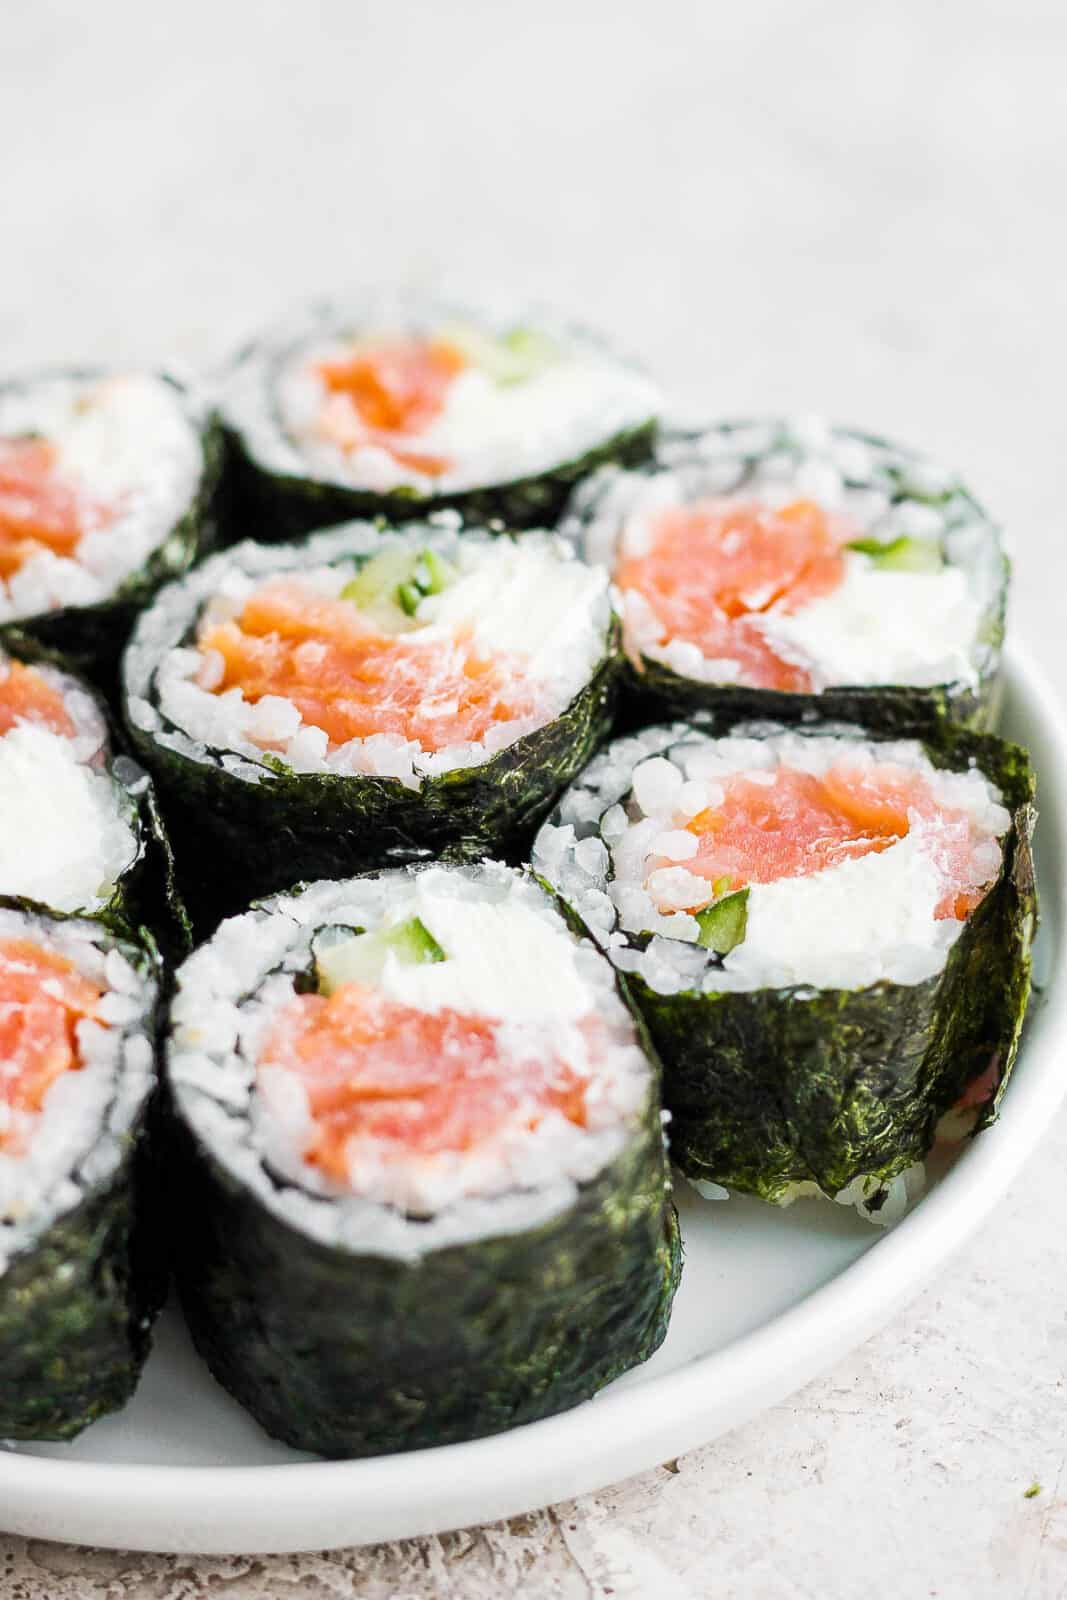 Pieces of a philadelphia roll on a plate.